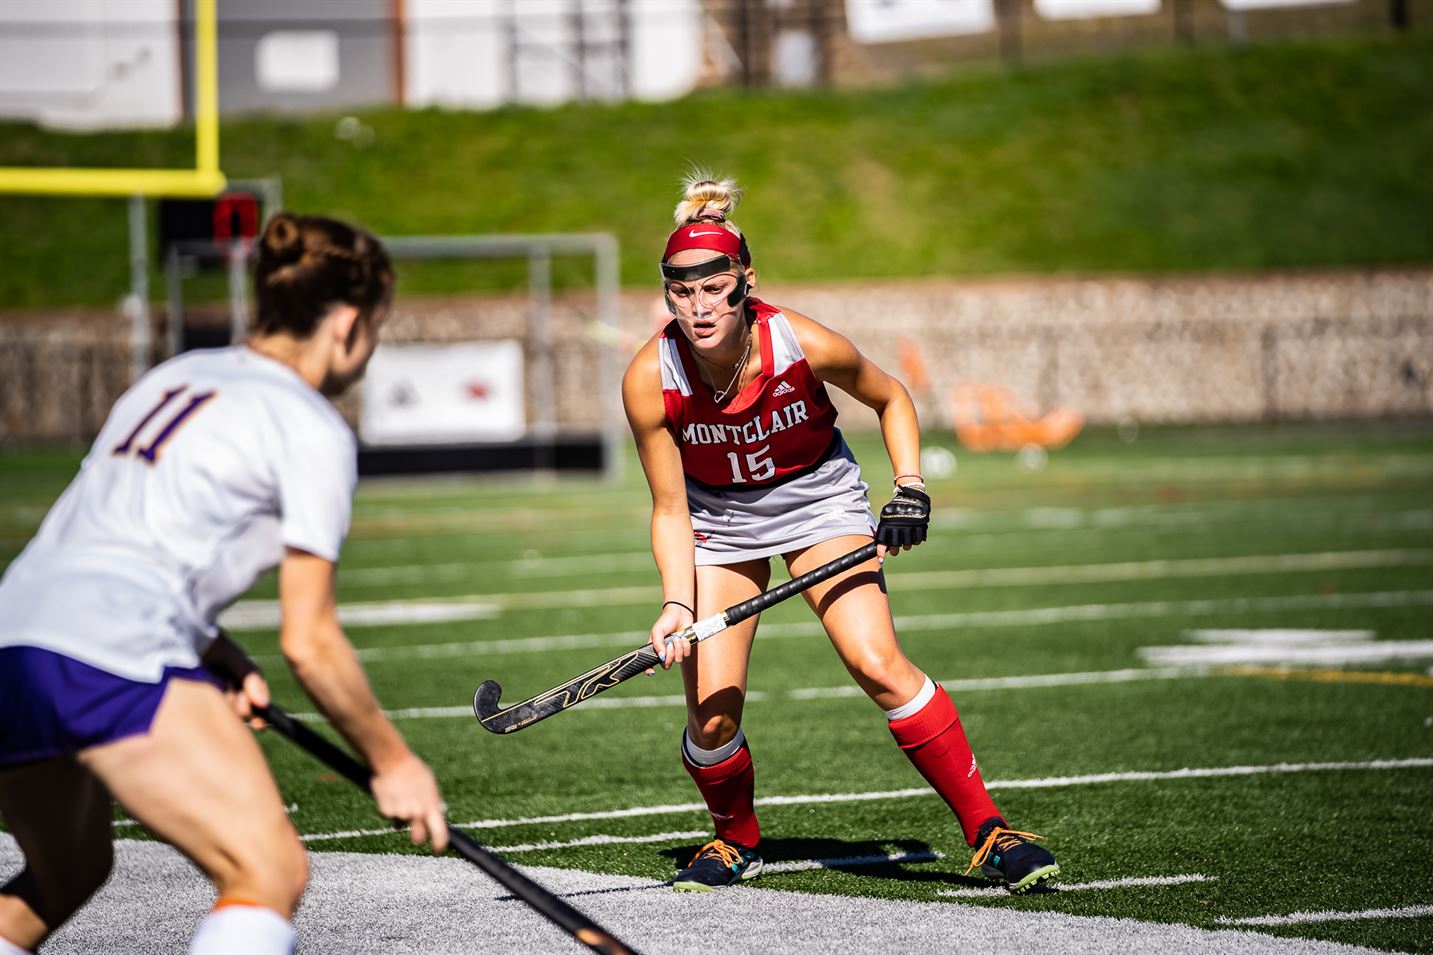 Freshman forward Gab Maisto had four goals and three assists in her debut season with the Red Hawks. Photo courtesy of David Venezia